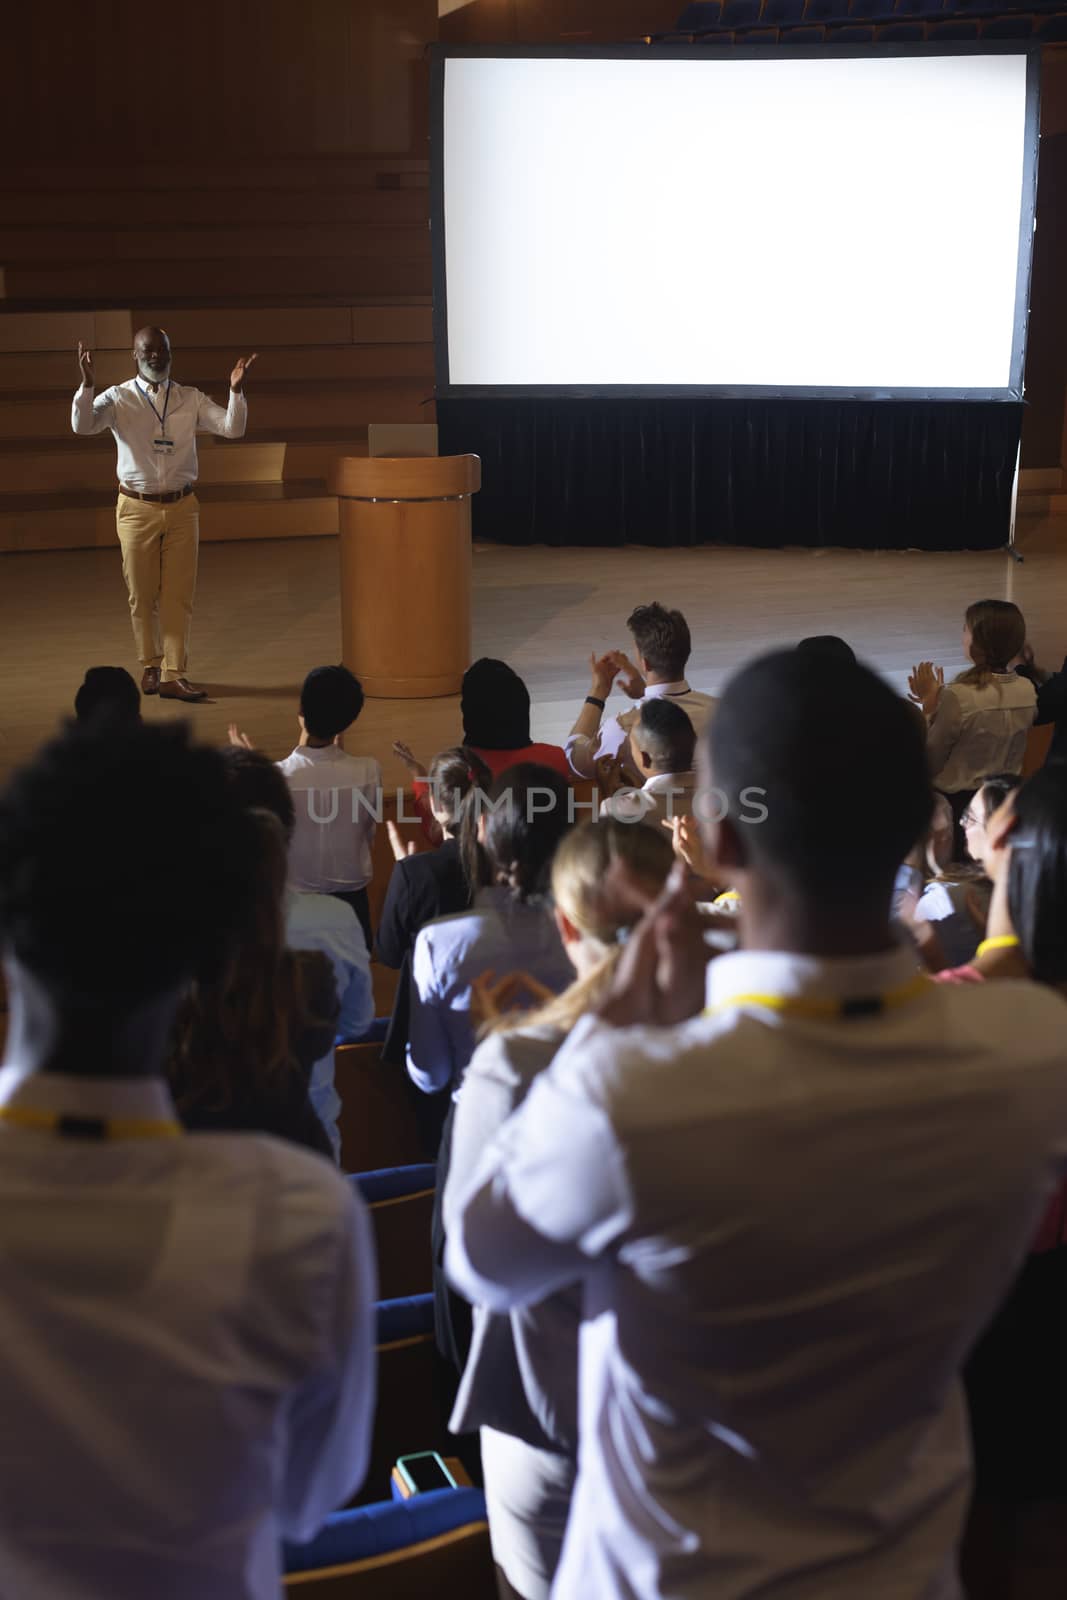 High view of matured African-American businessman standing and giving presentation in auditorium 